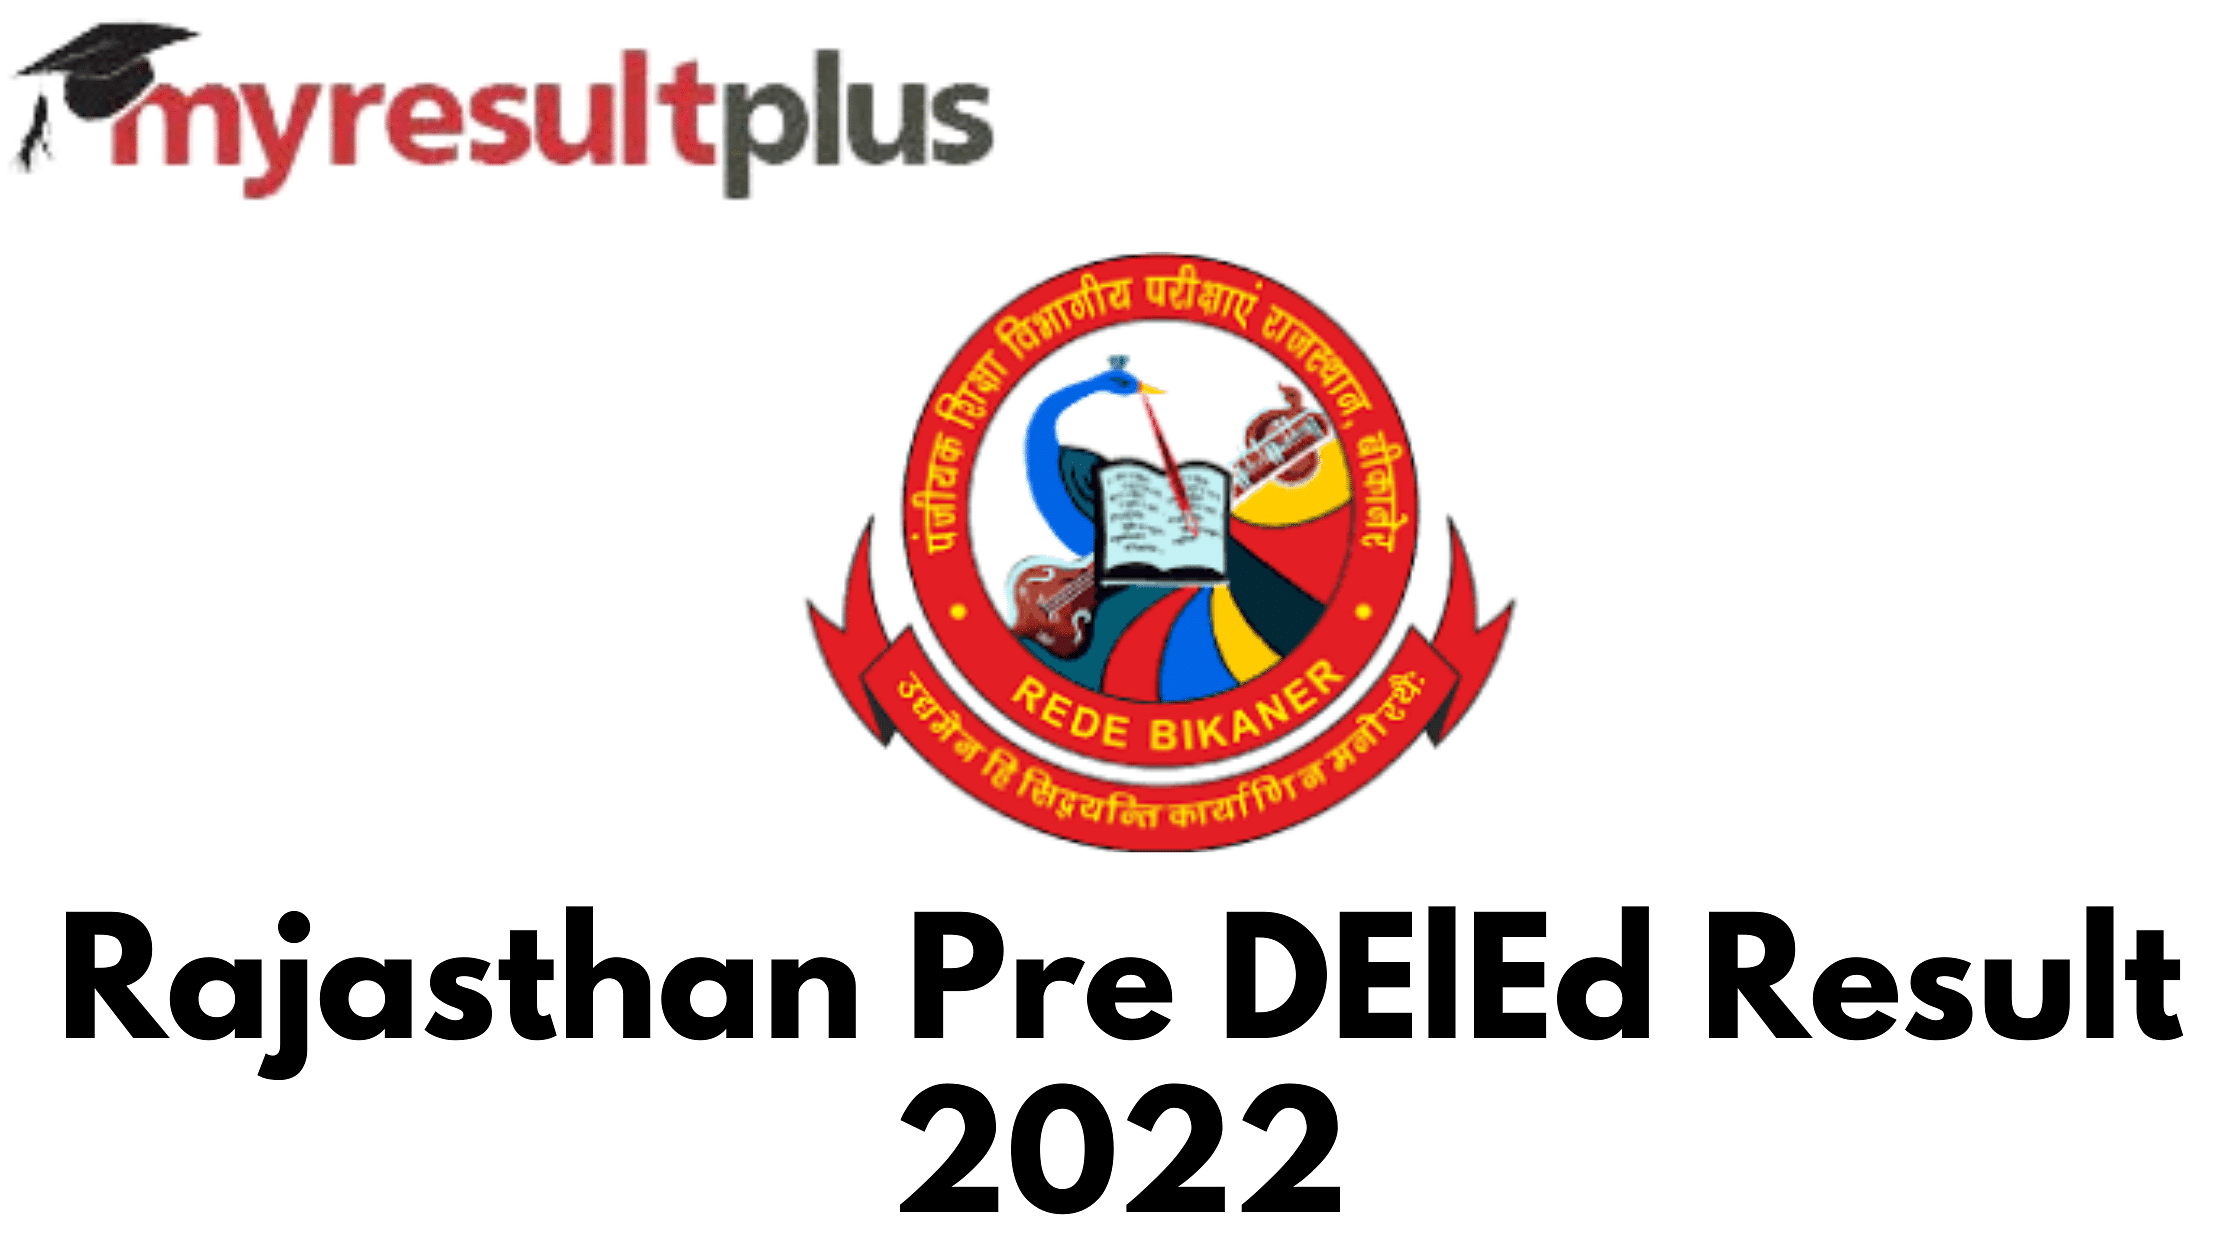 Rajasthan Pre DElEd Result 2022 Out, Know How to Check Here